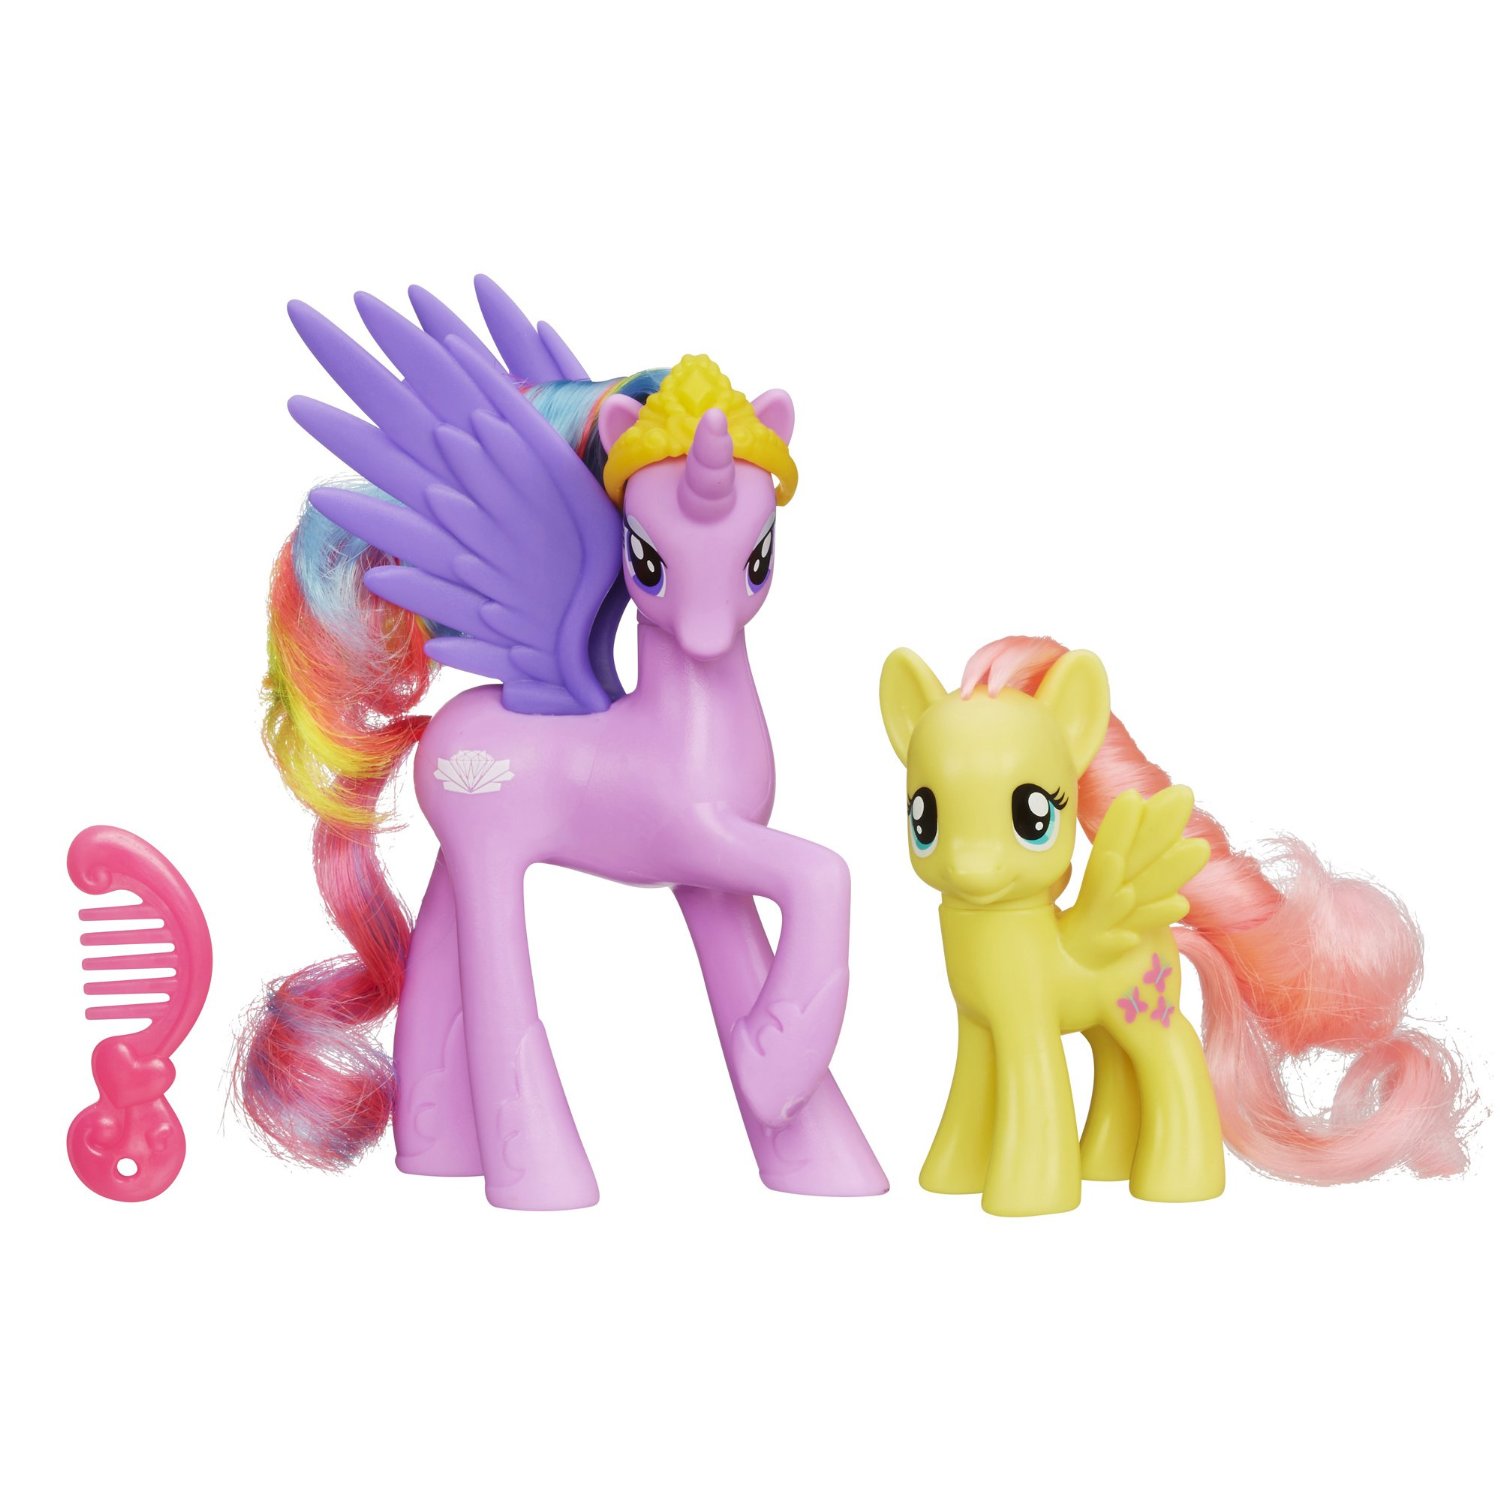 My Little Pony Princess Sterling and Fluttershy Figures Only $6.76 (Reg. $14.99)